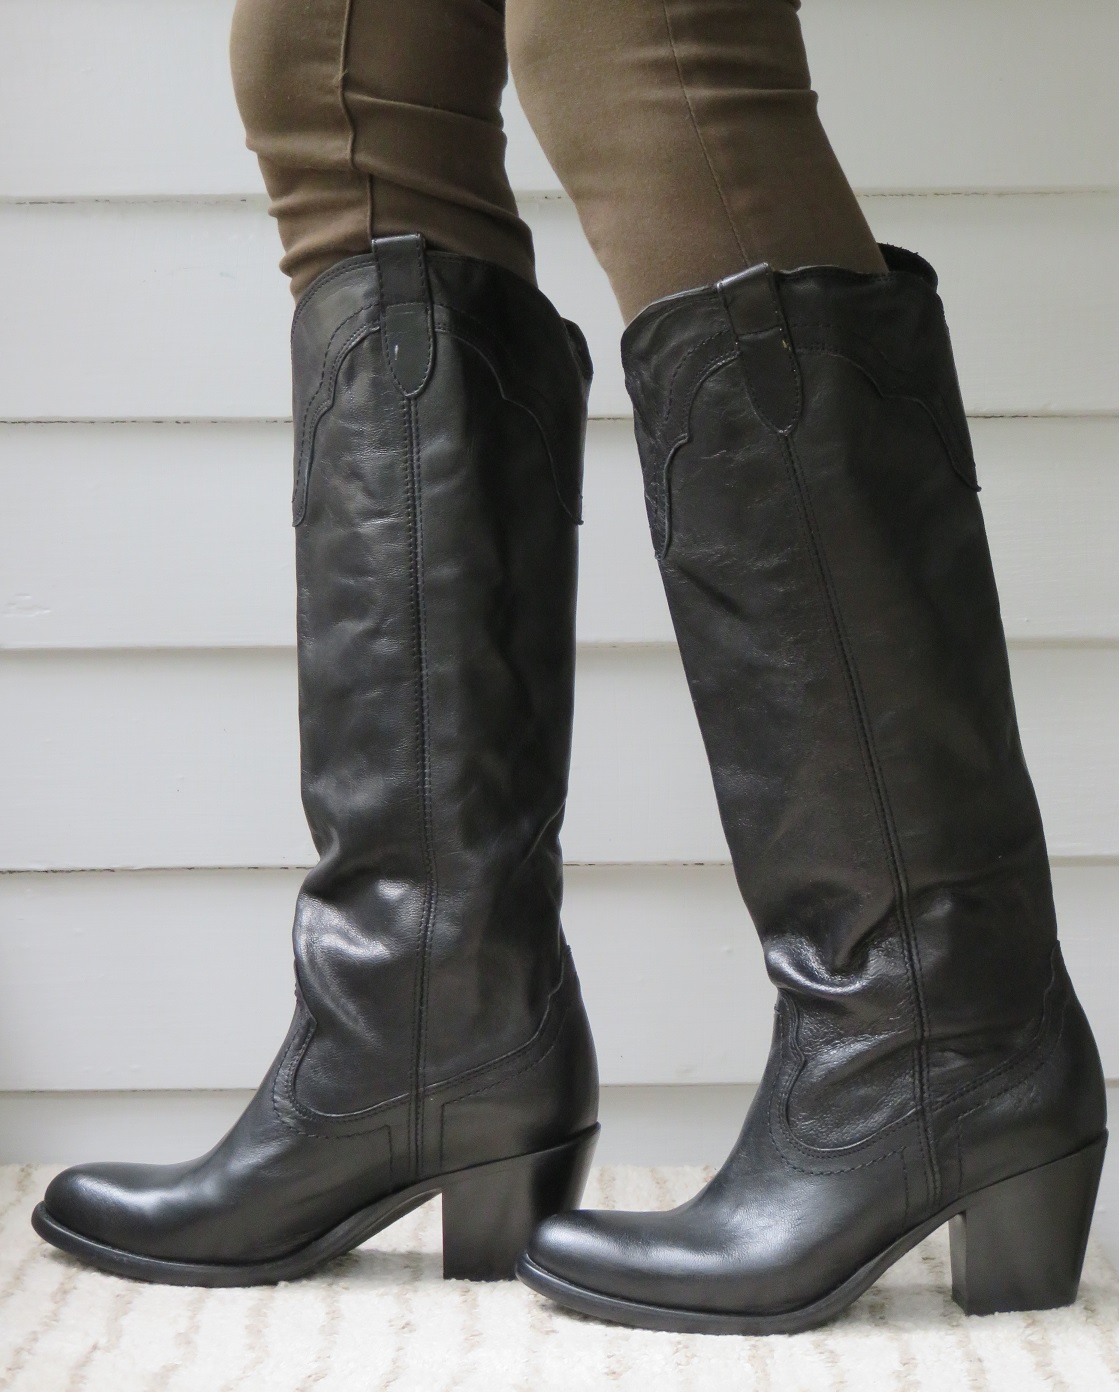 Finding Tall Boots for Slim Calves (and Striking Out with Frye)